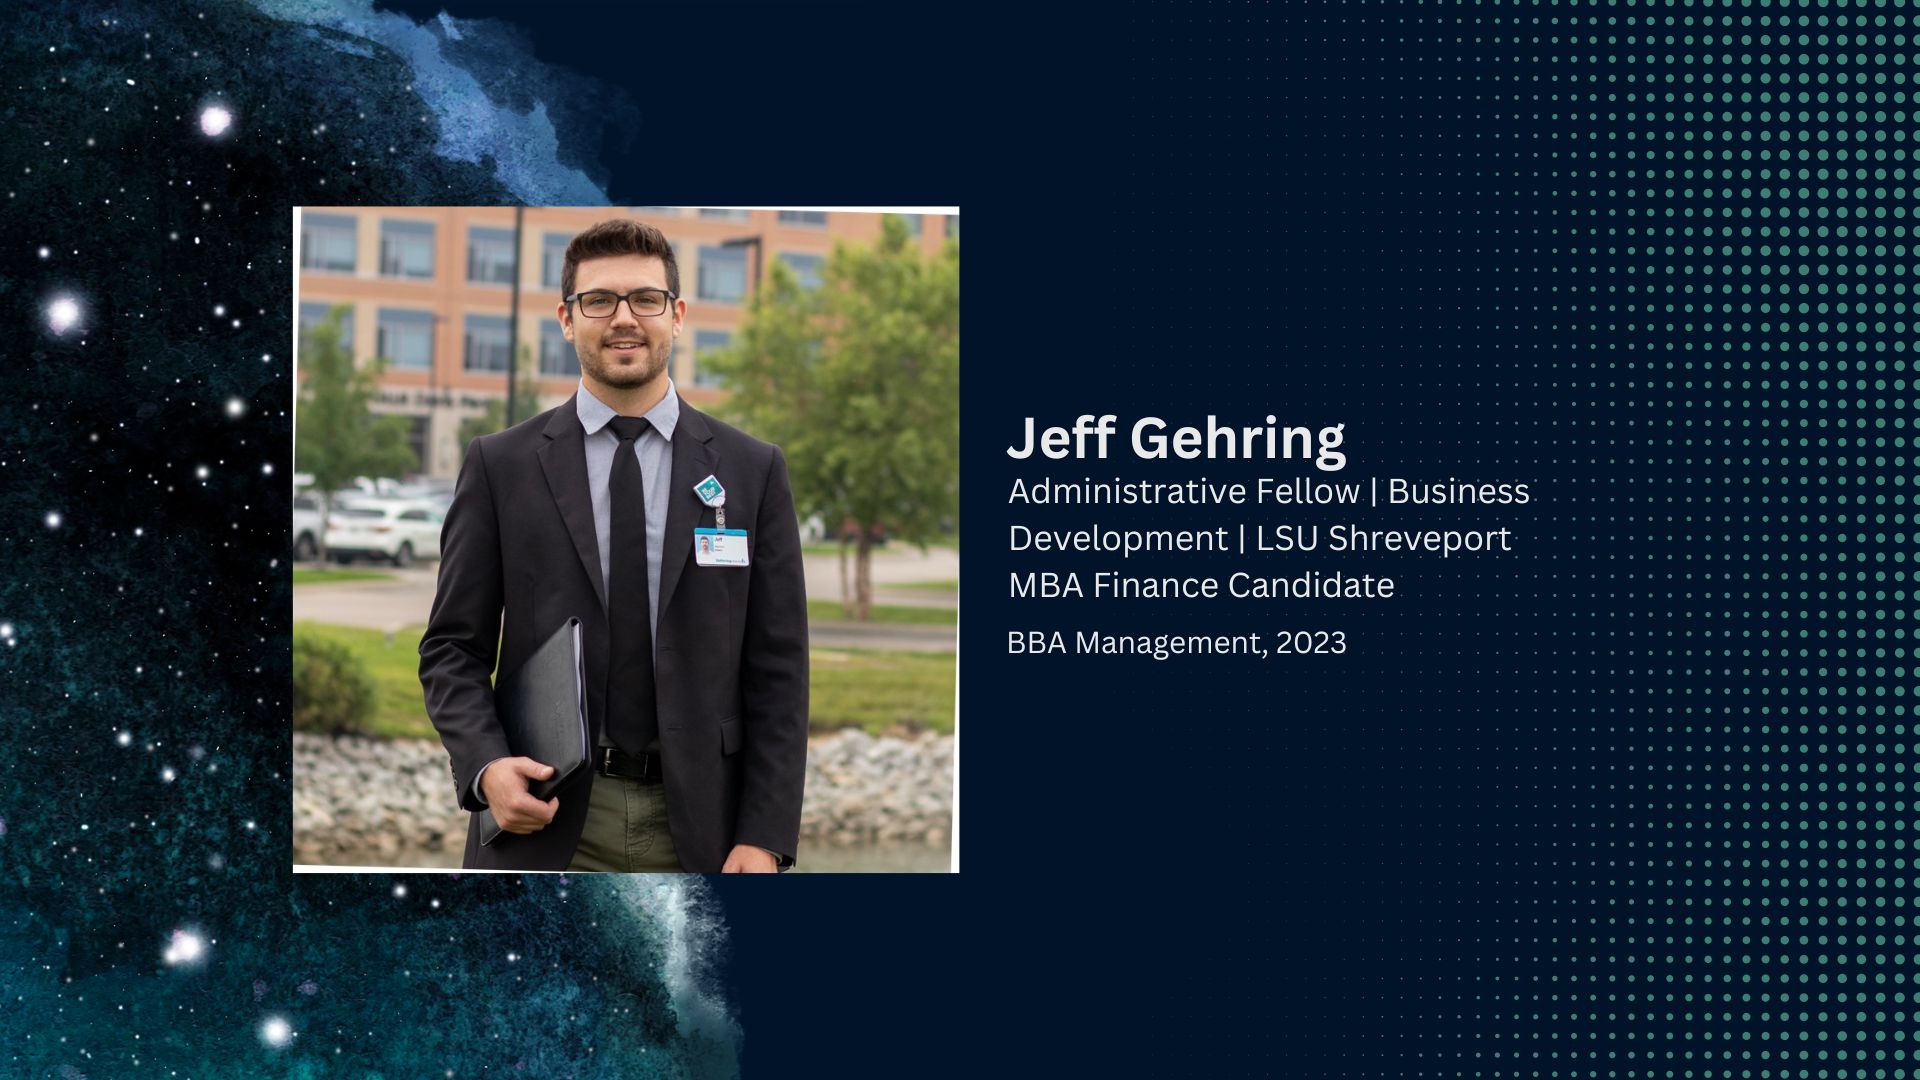 Jeff Gehring – Business Development Administrative Fellow at Kettering Health and MBA Finance Candidate at LSU Shreveport